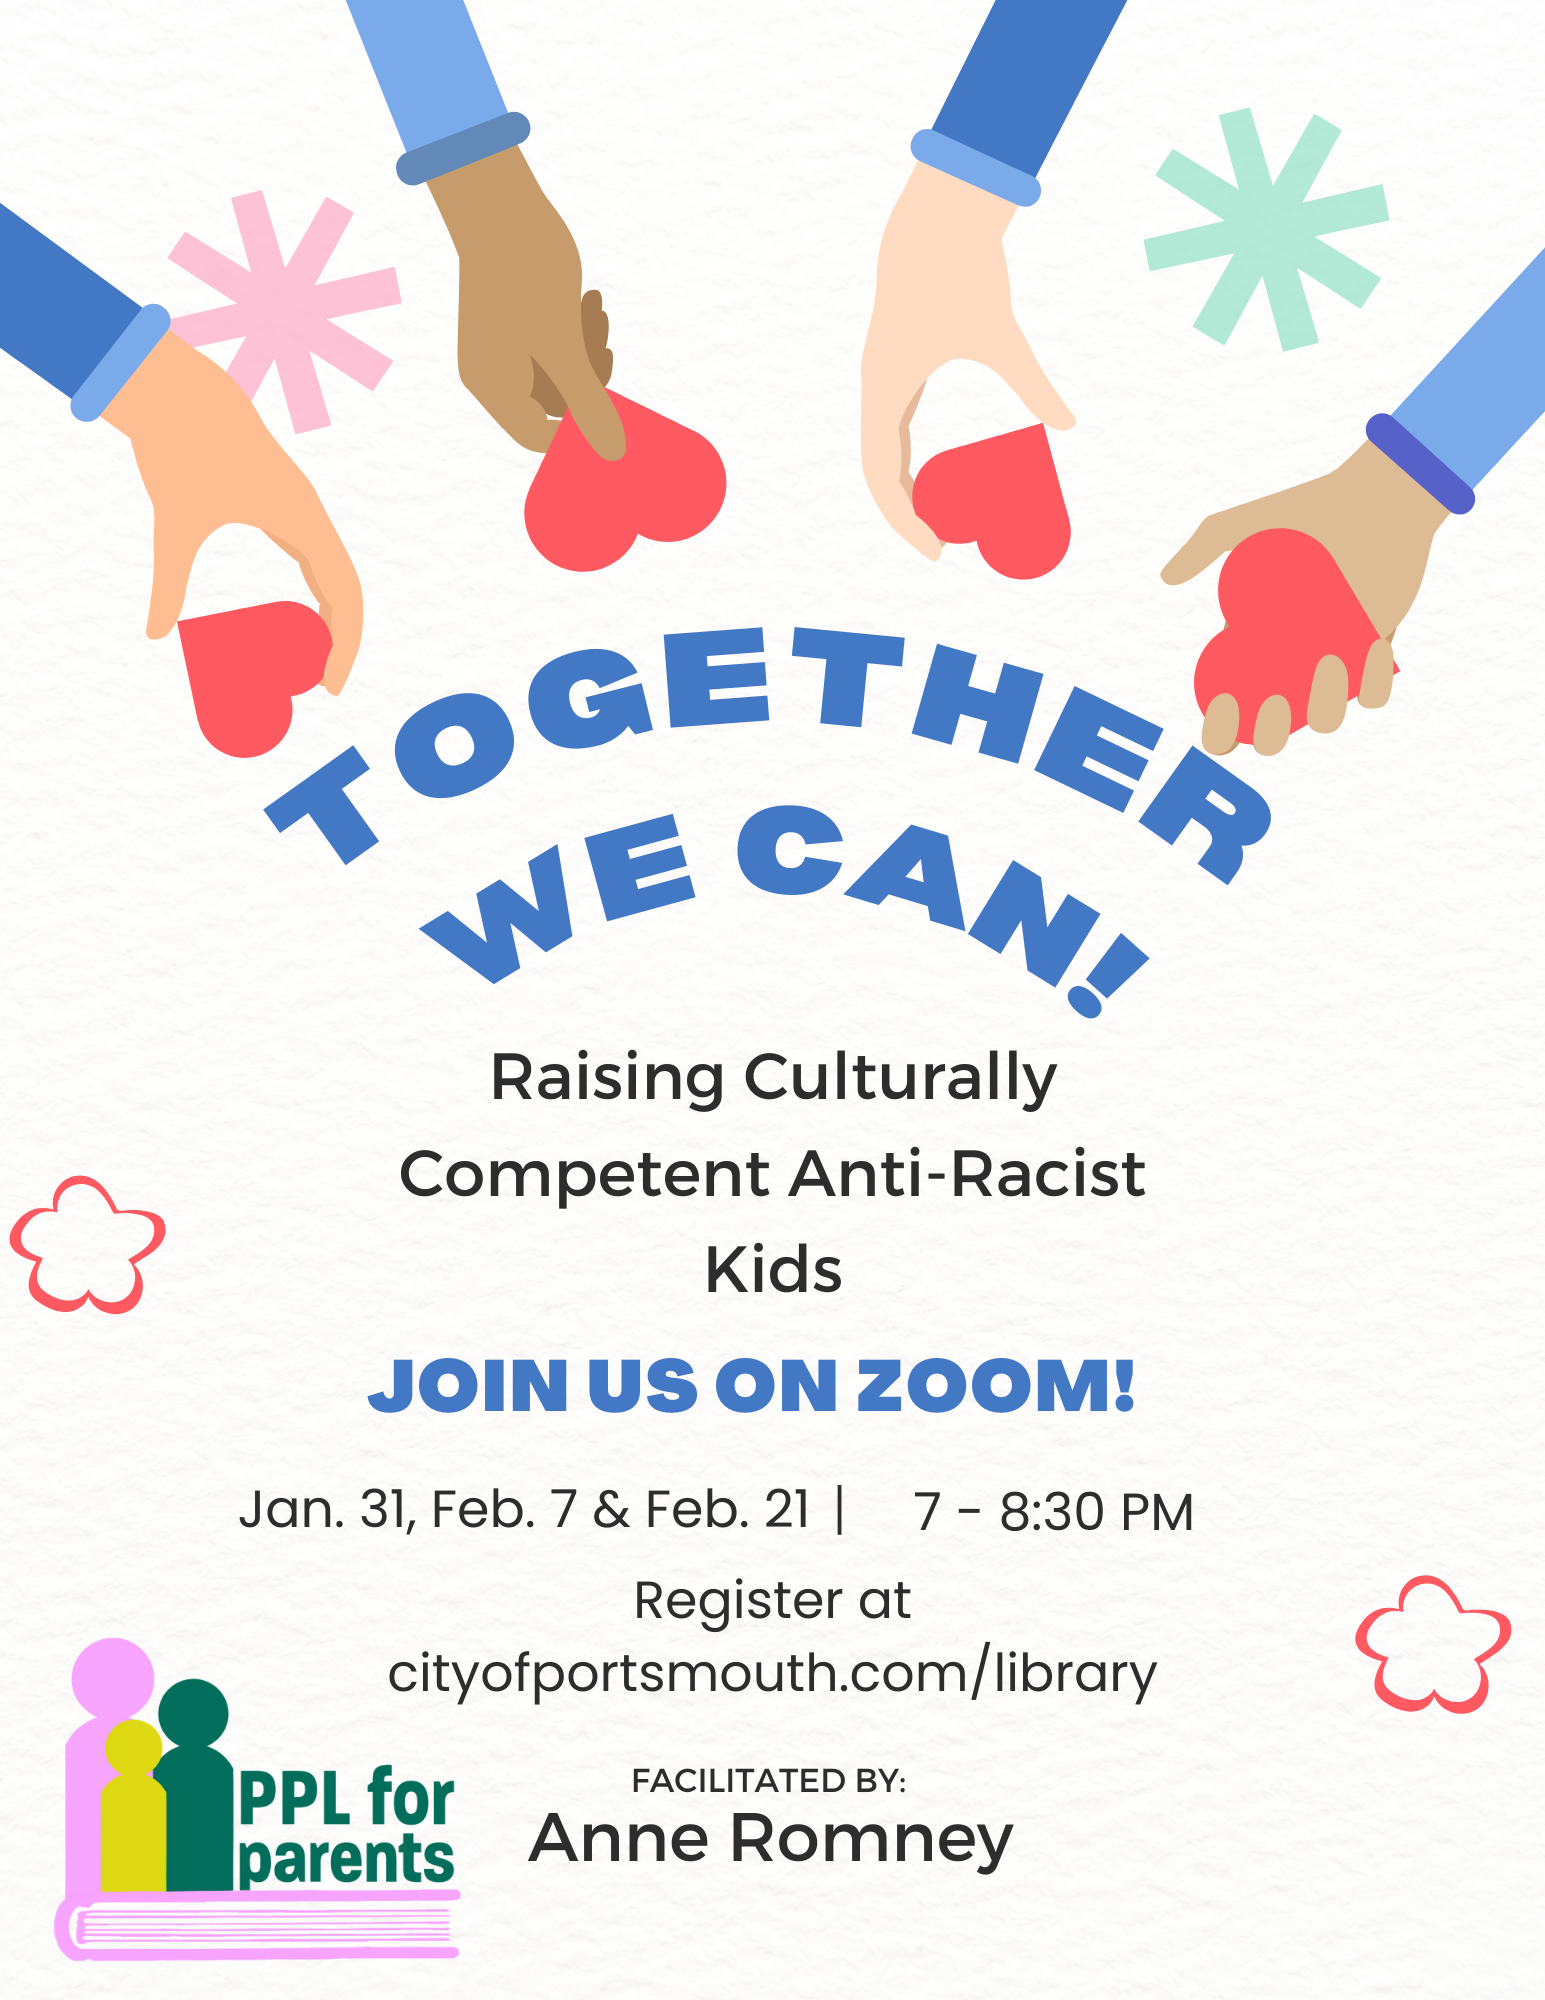 Together we can: Raising Culturally Competent, Antiracist Kids